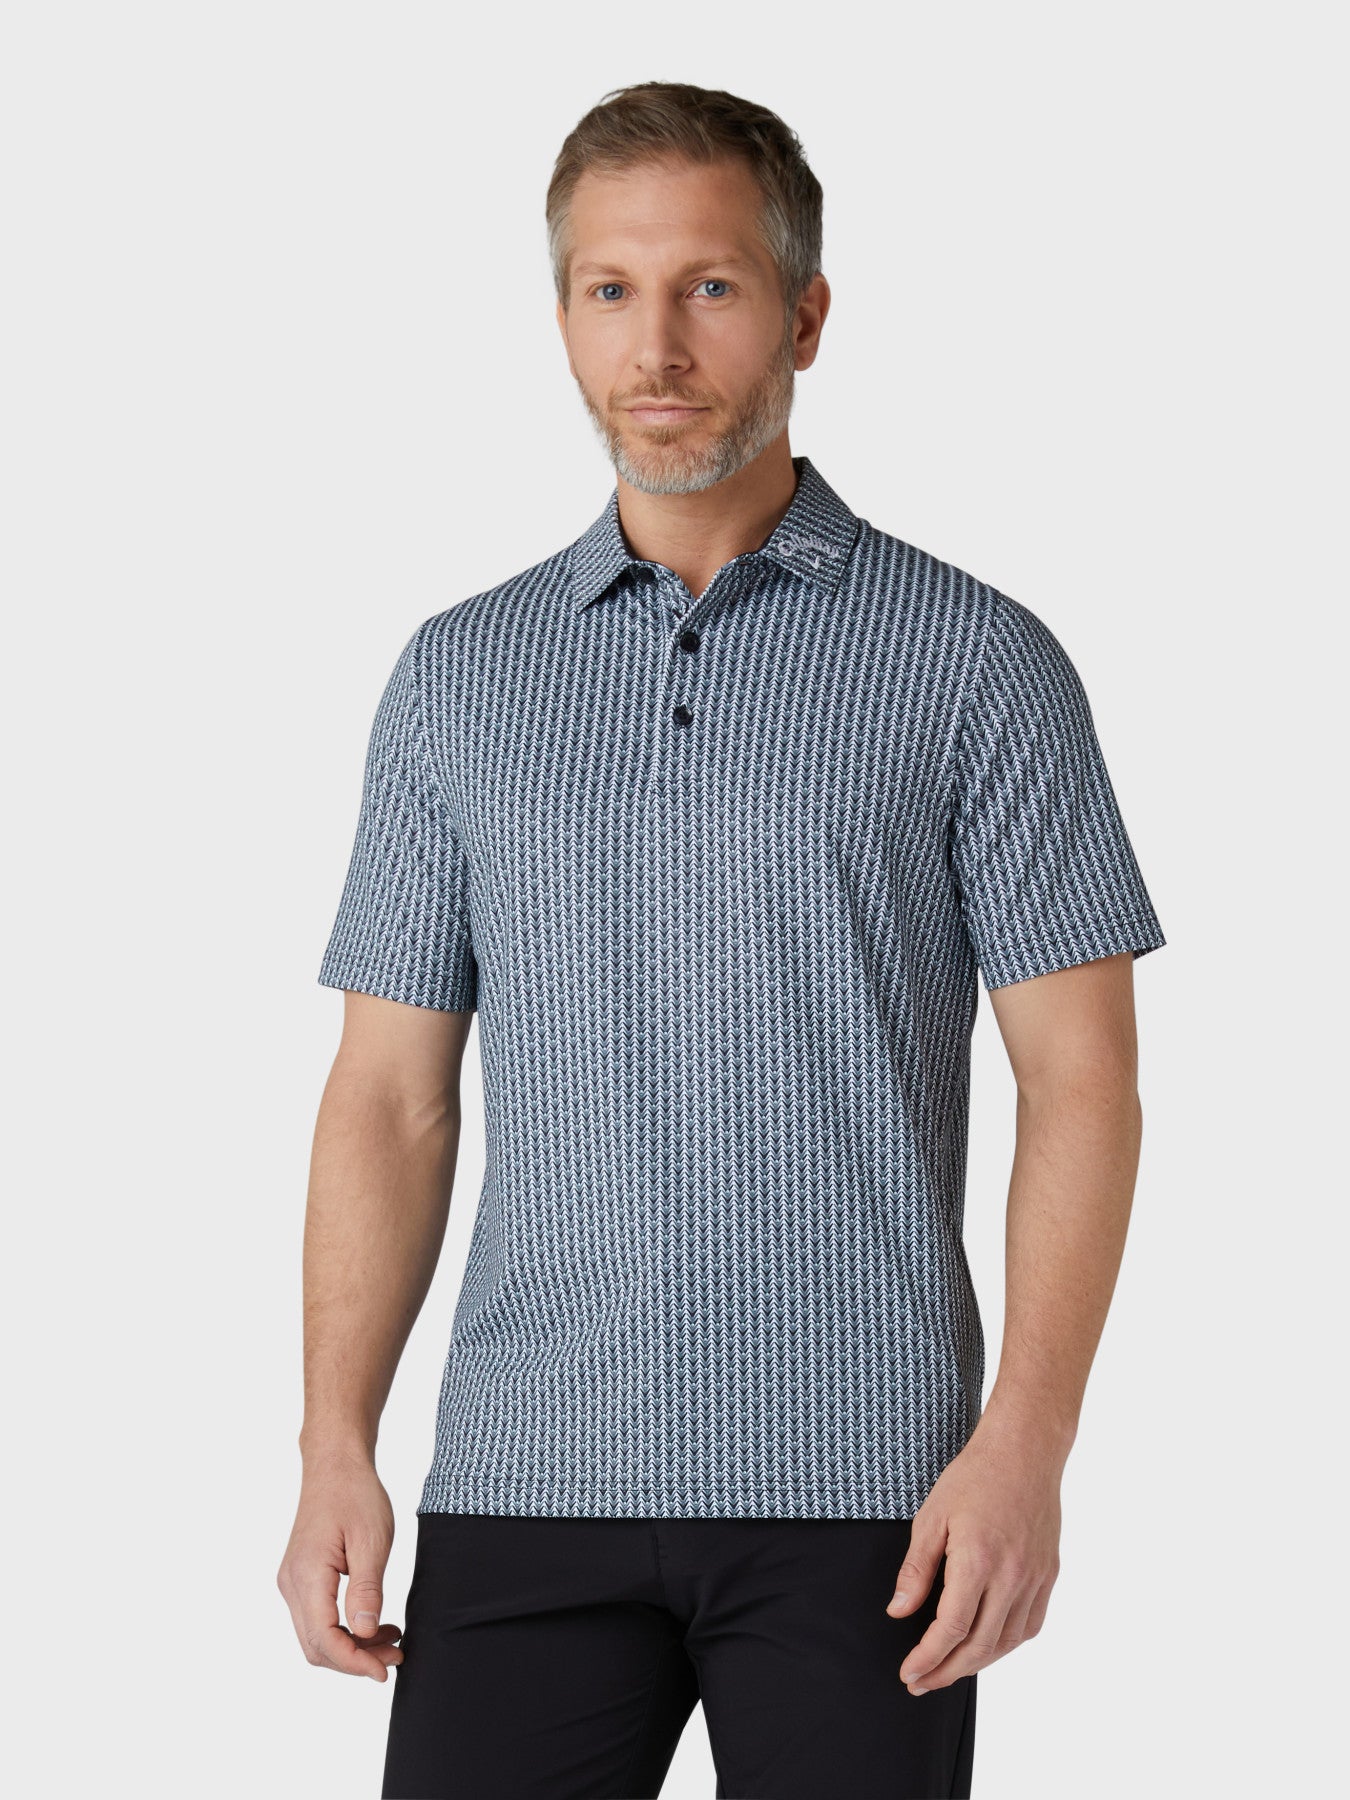 View Mens Chev And Ball All Over Print Polo In Caviar Caviar XXL information